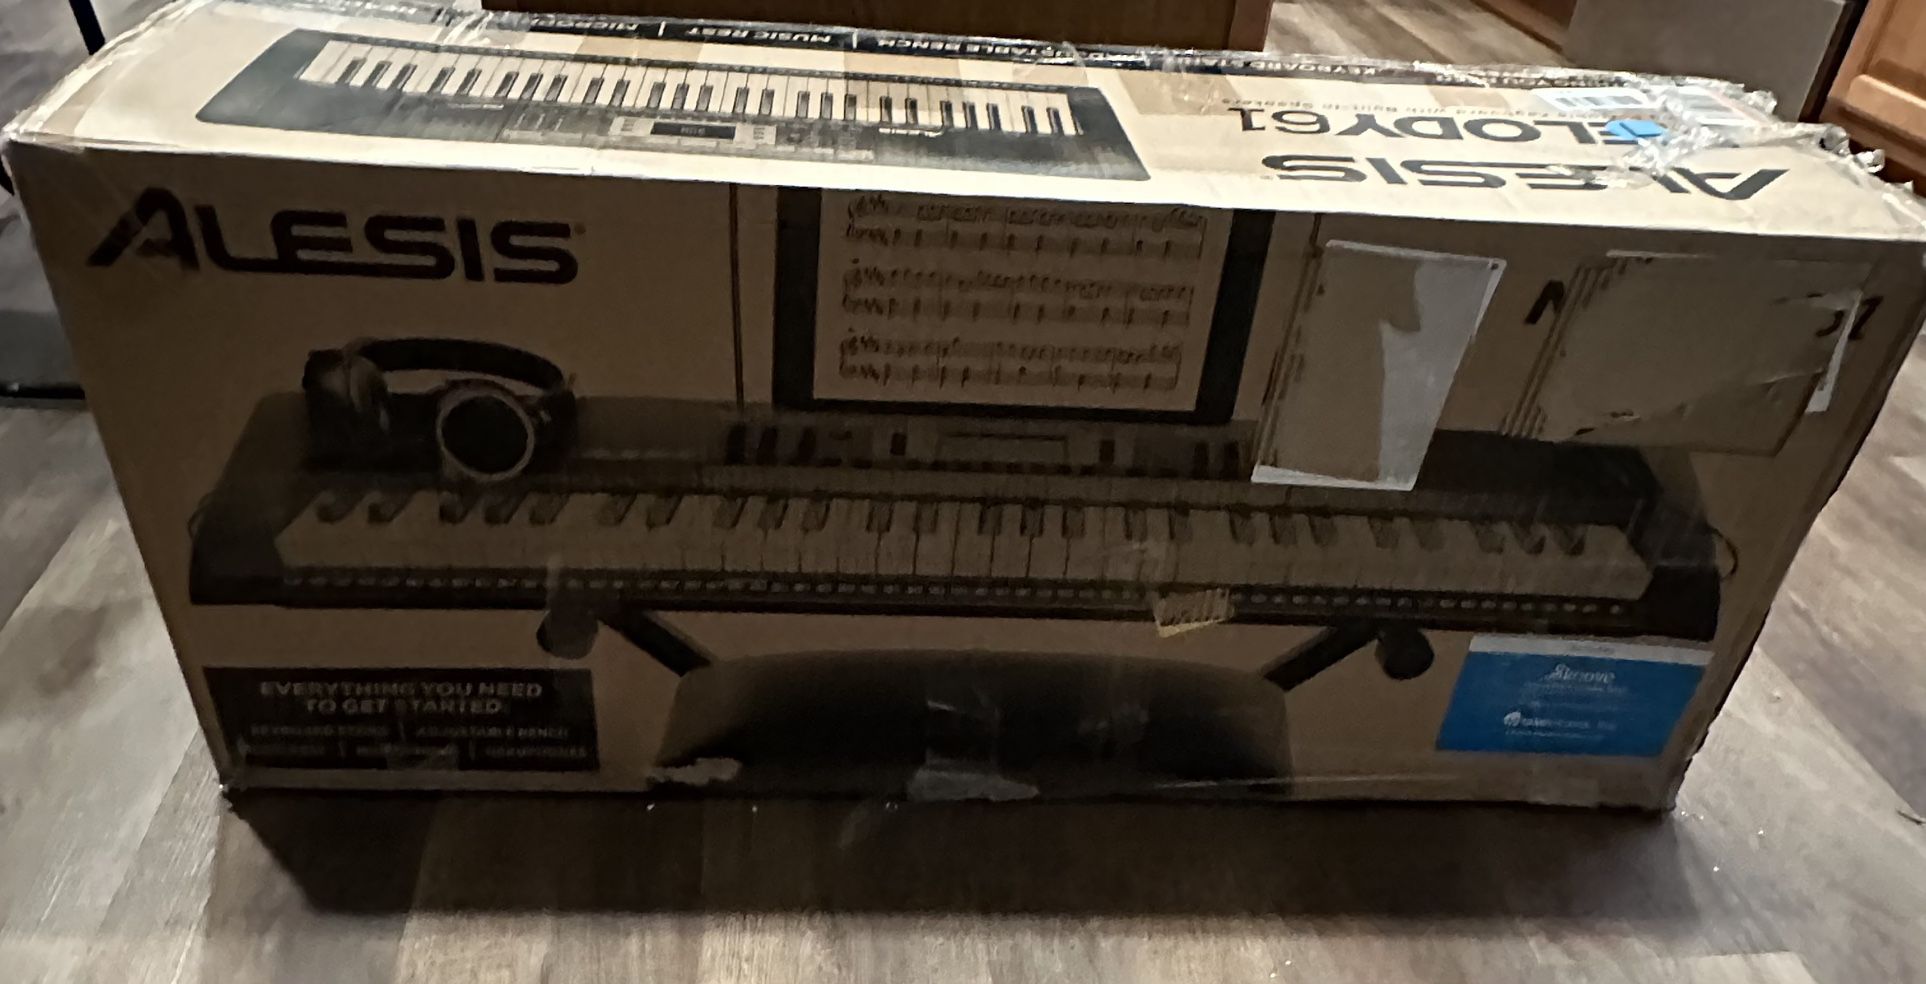 Alesis Melody 61 Key Keyboard Piano for Beginners with, Stand, And Headphones